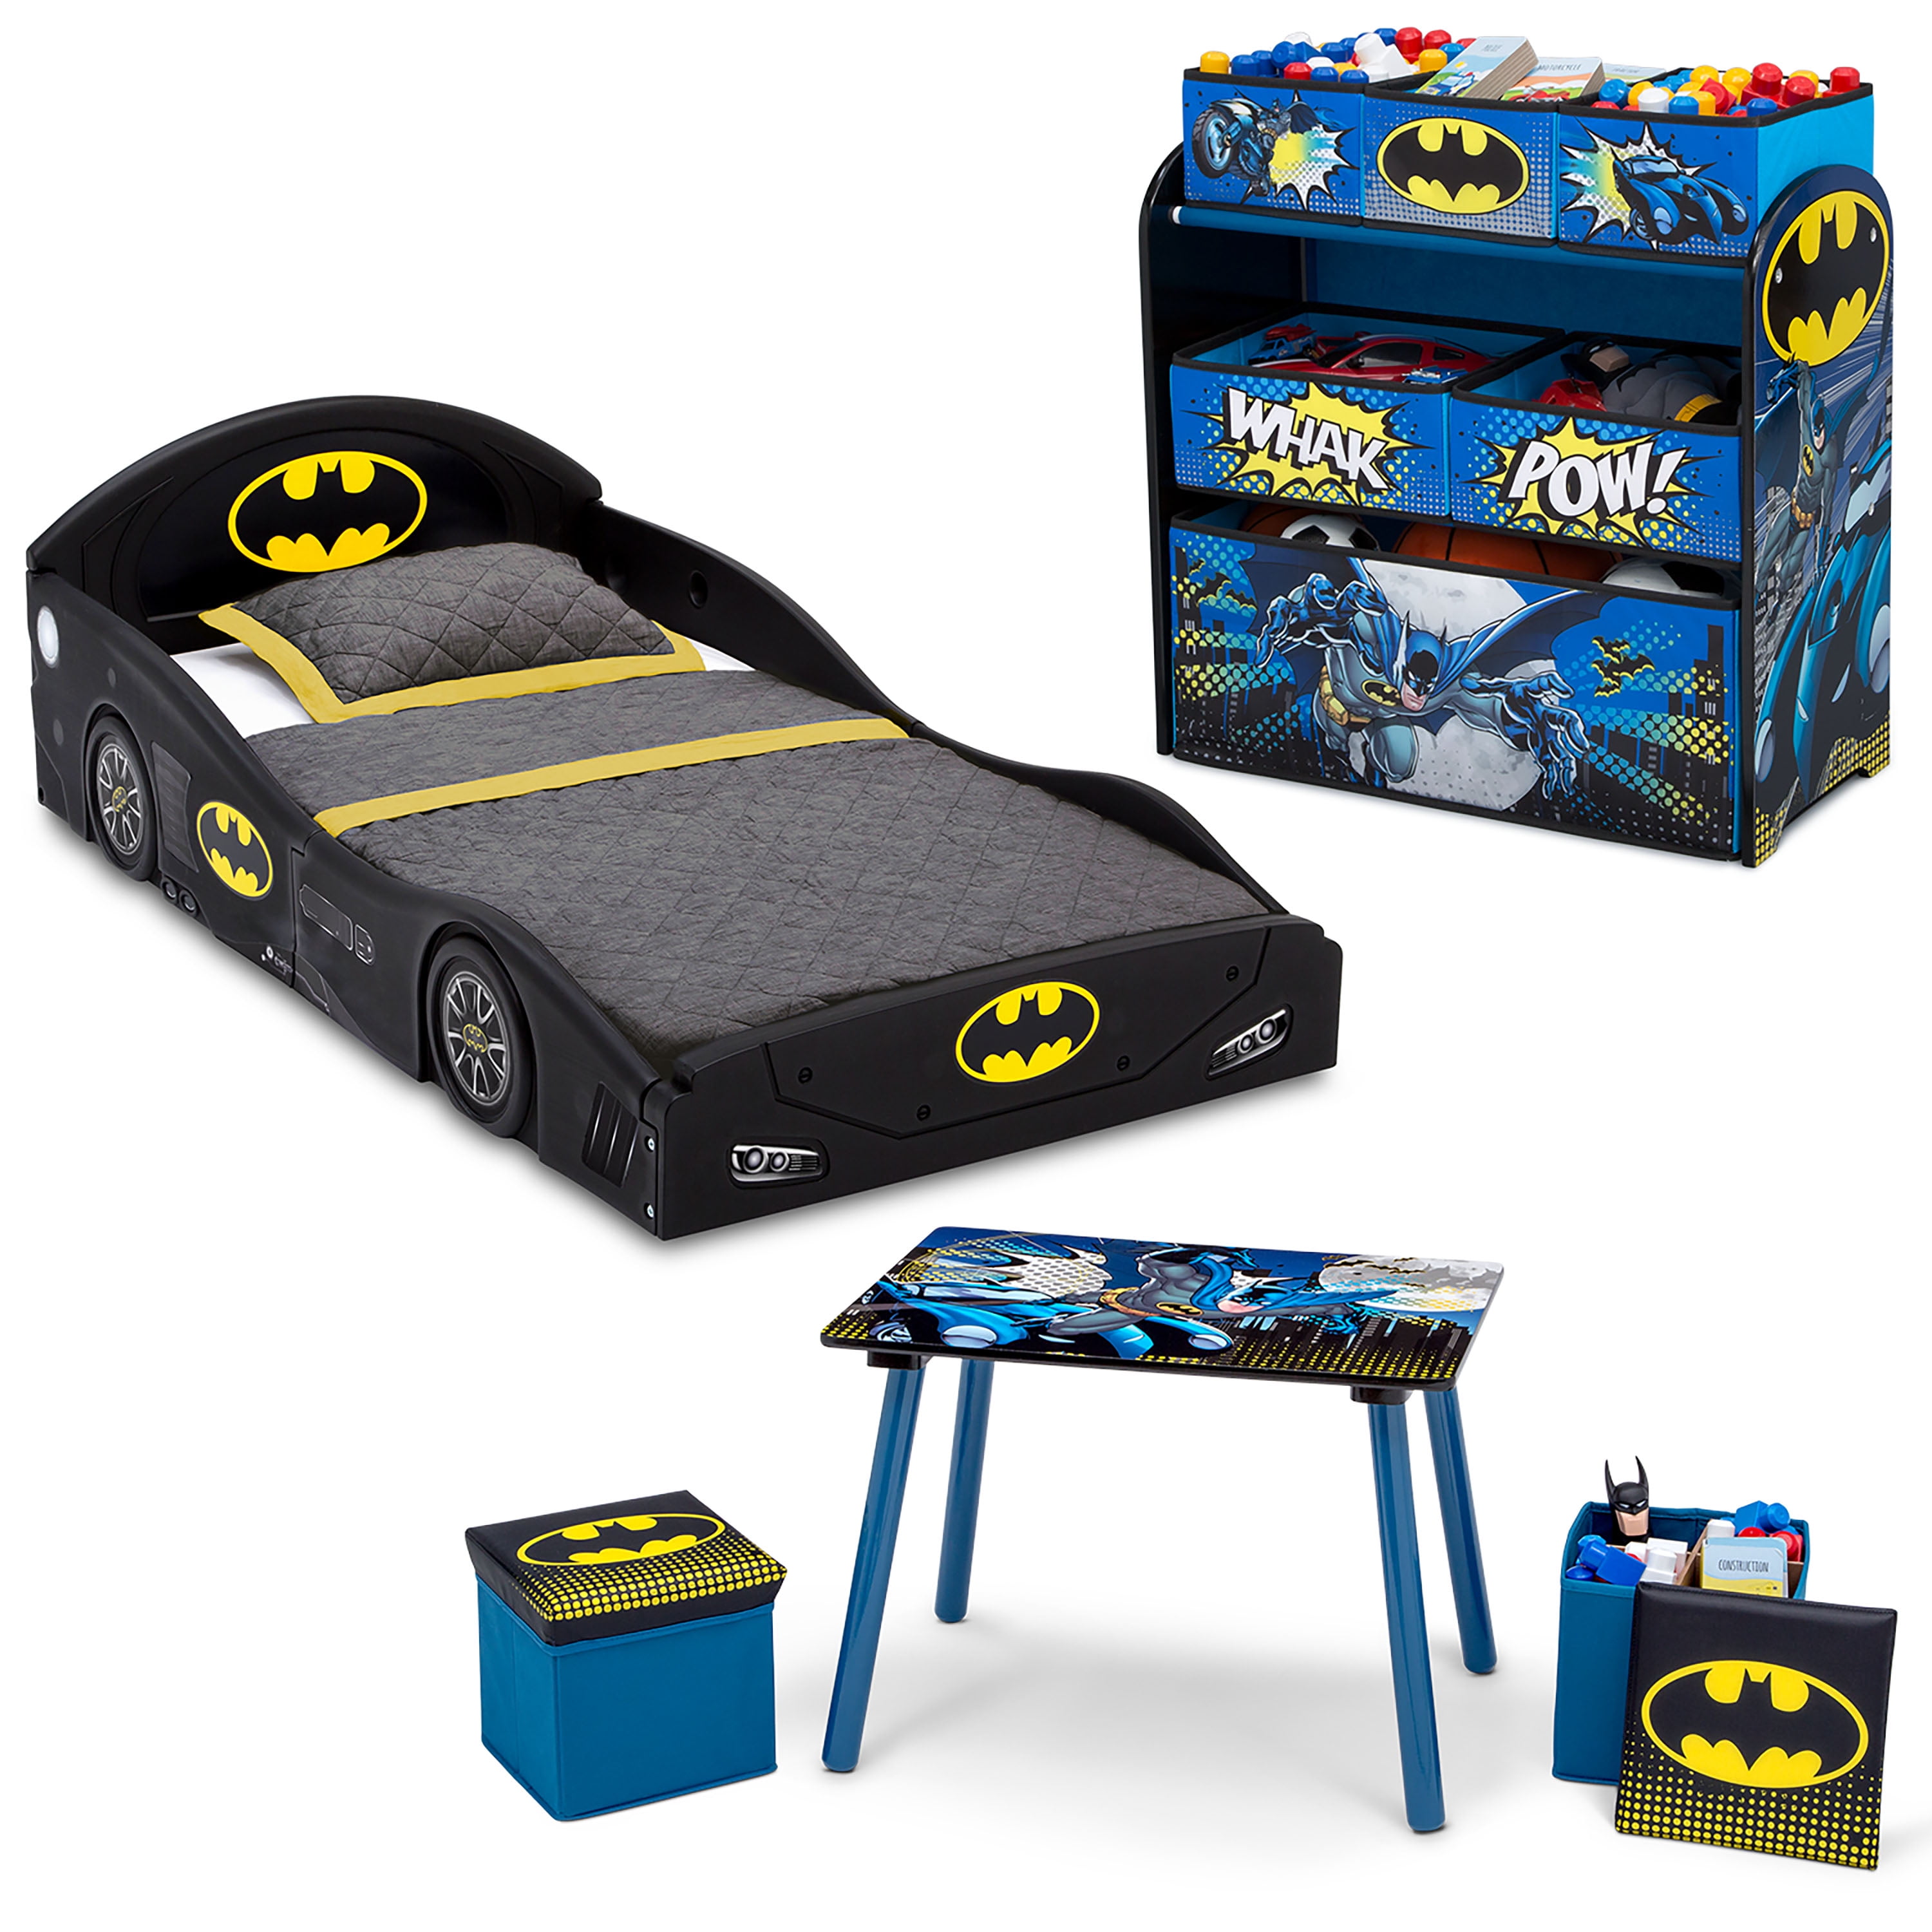 batman toy videos for toddlers